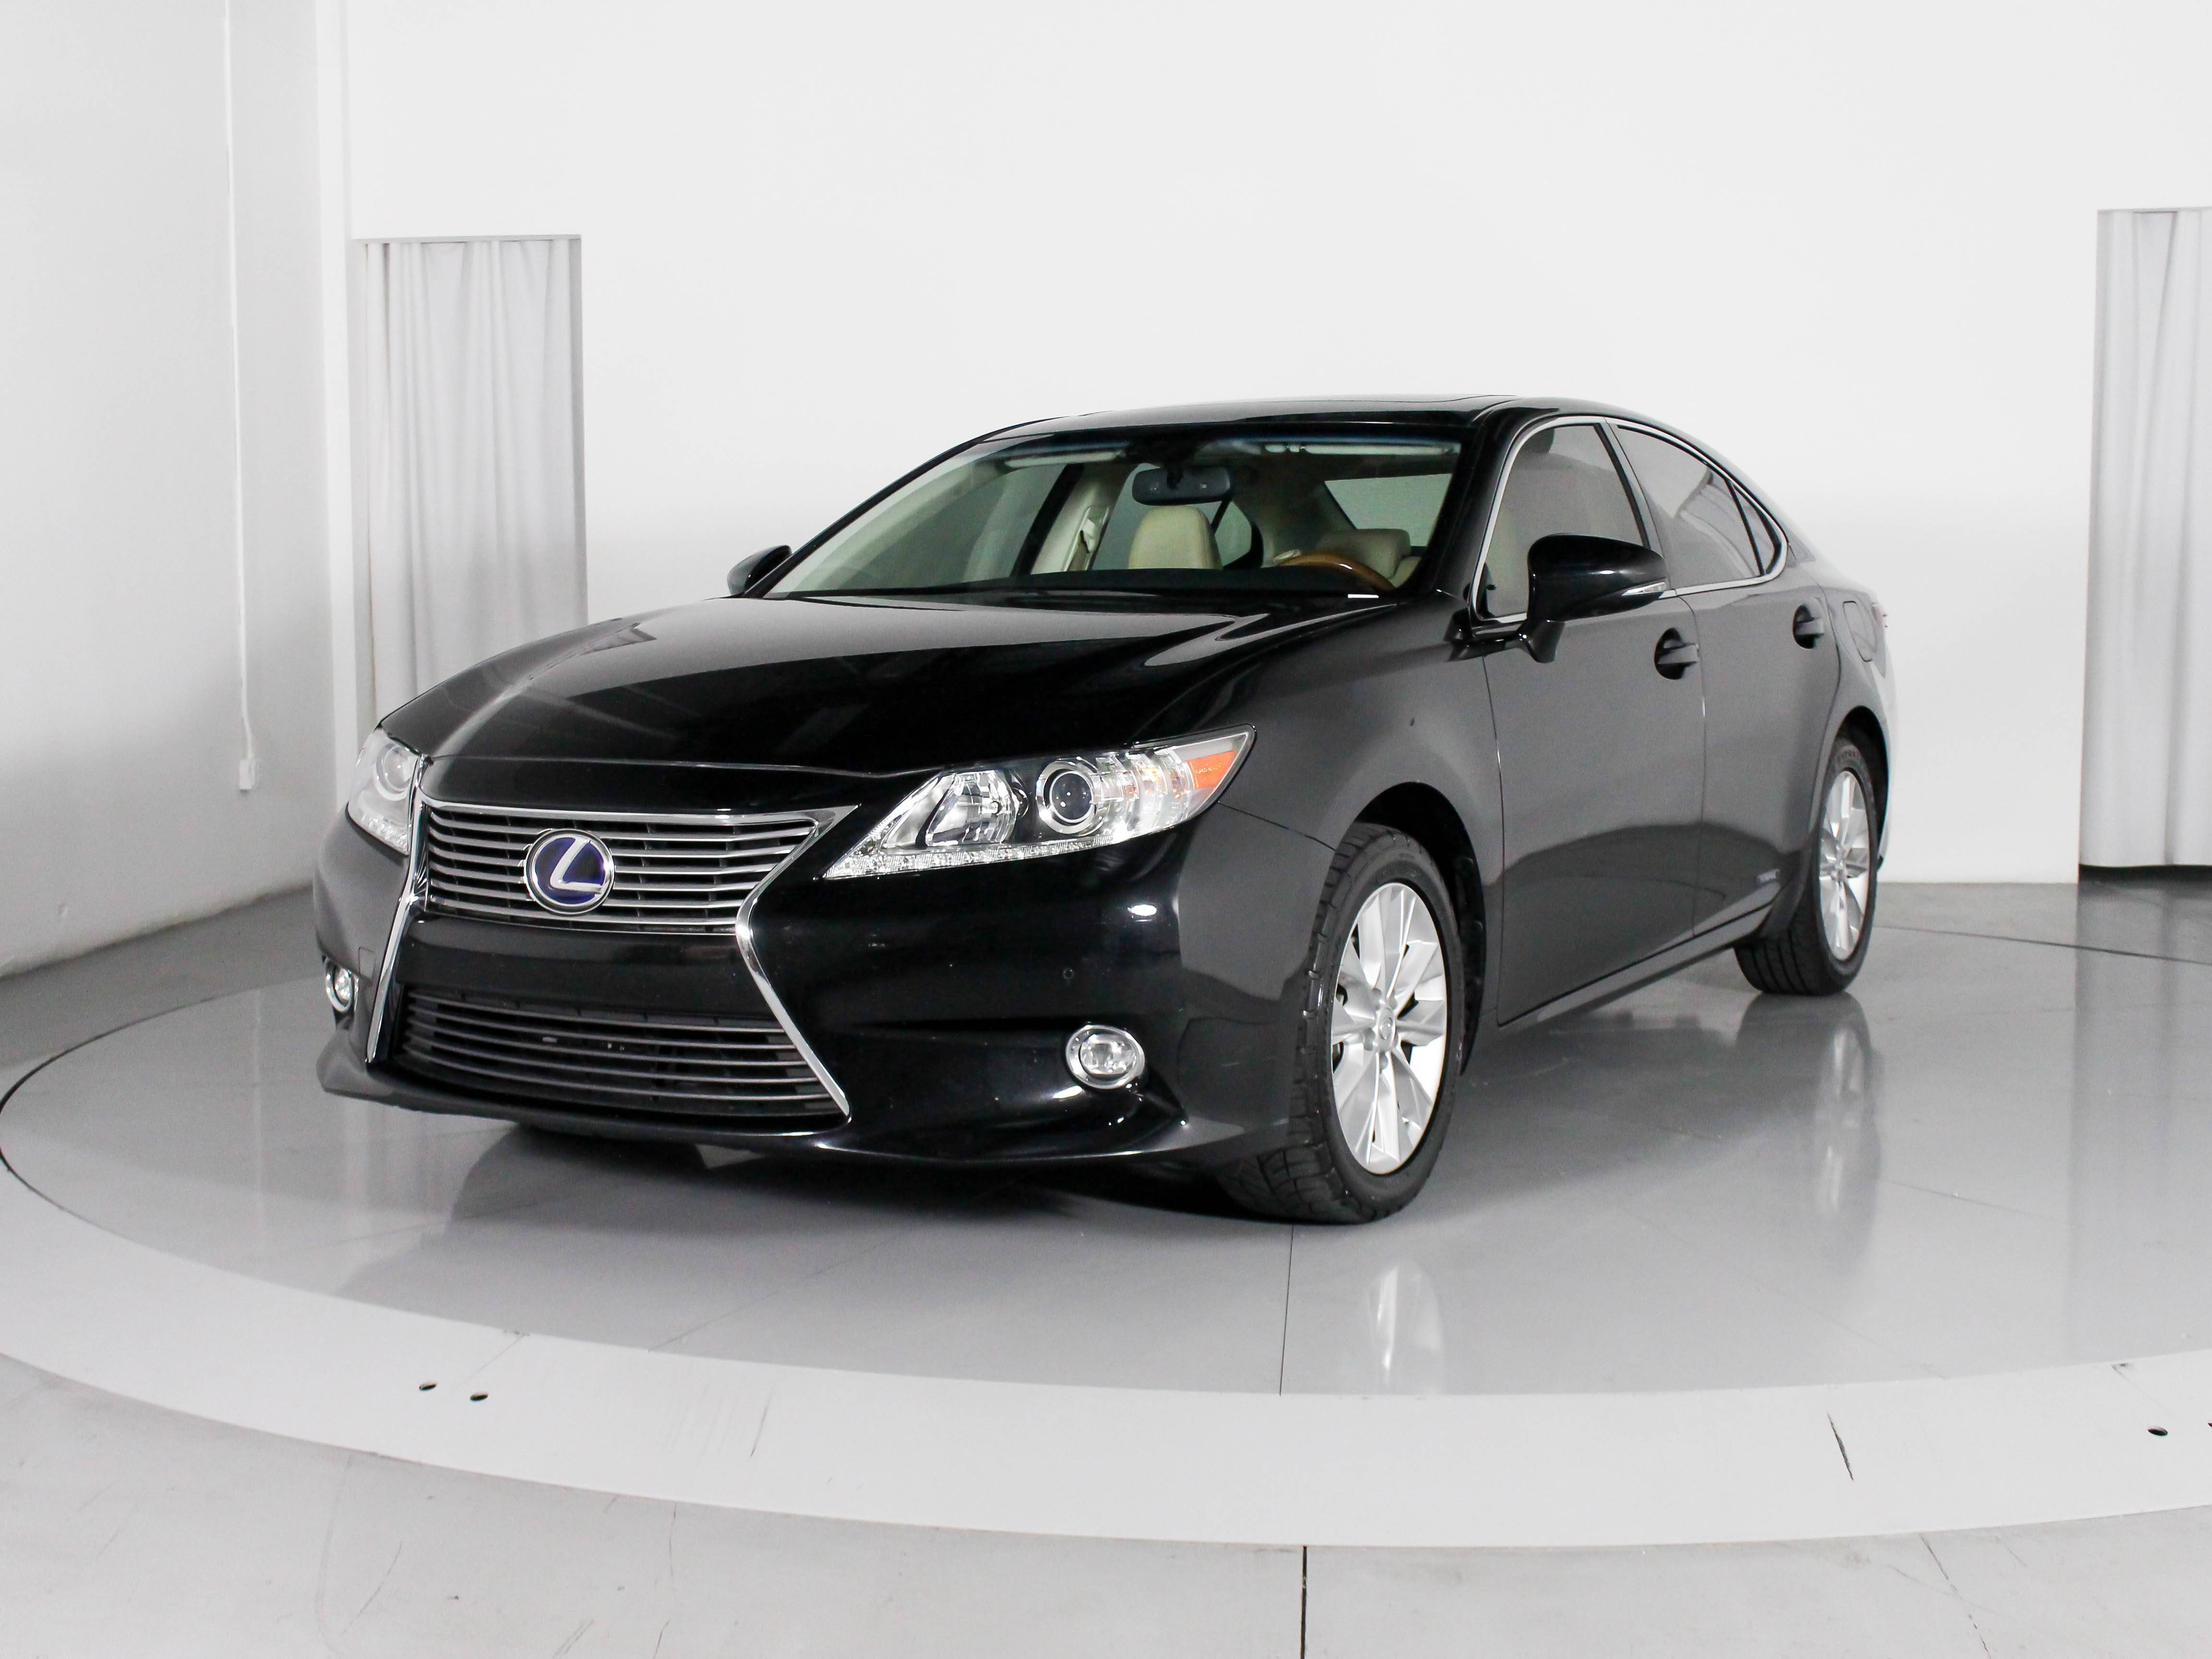 Used 2014 LEXUS ES 300H Hybrid for sale in WEST PALM | 104218